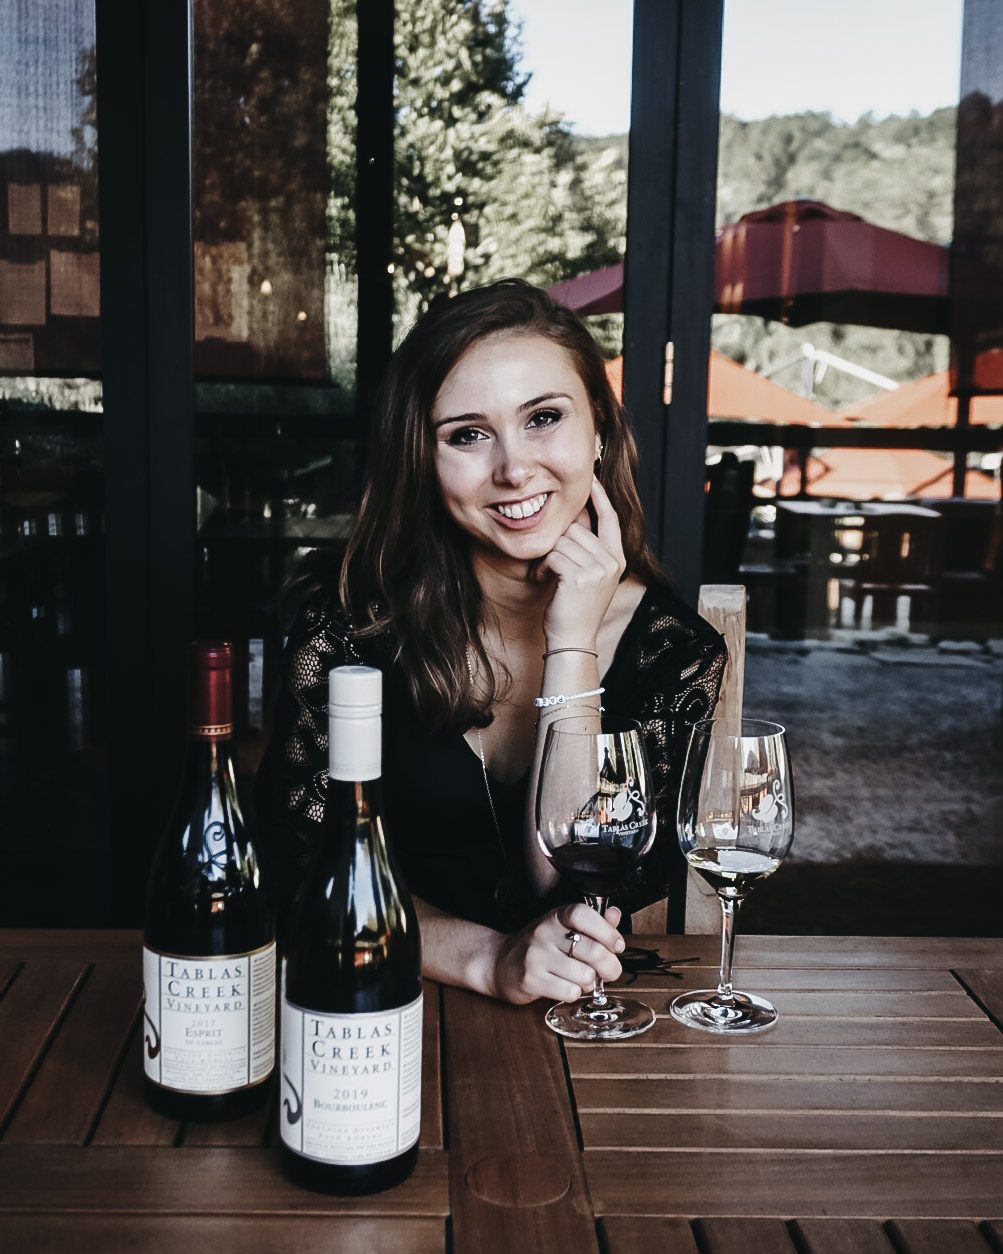 a girl sipping wine at Tablas Creek winery